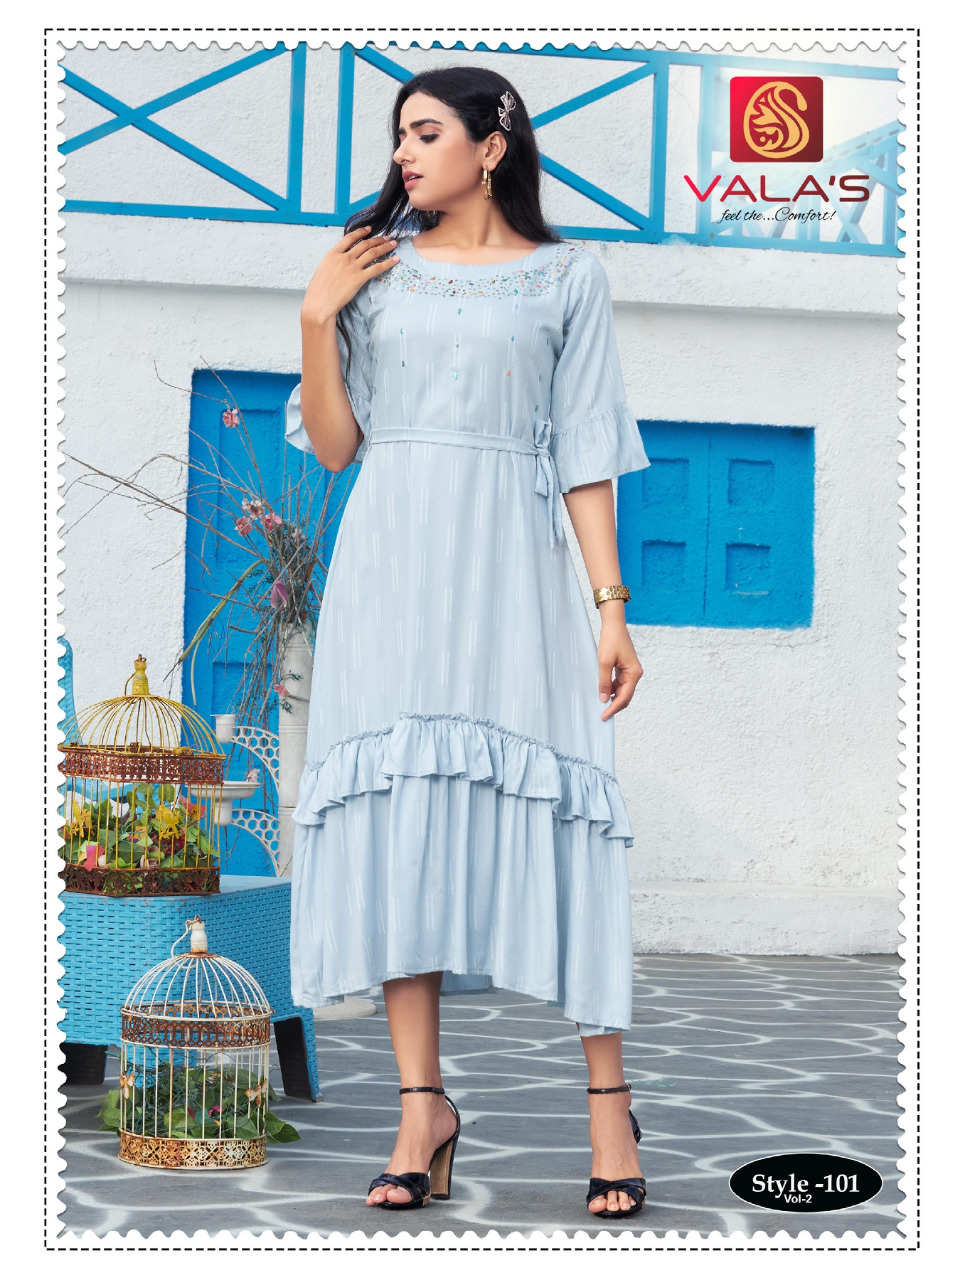 Valas Style vol 2 collection 1